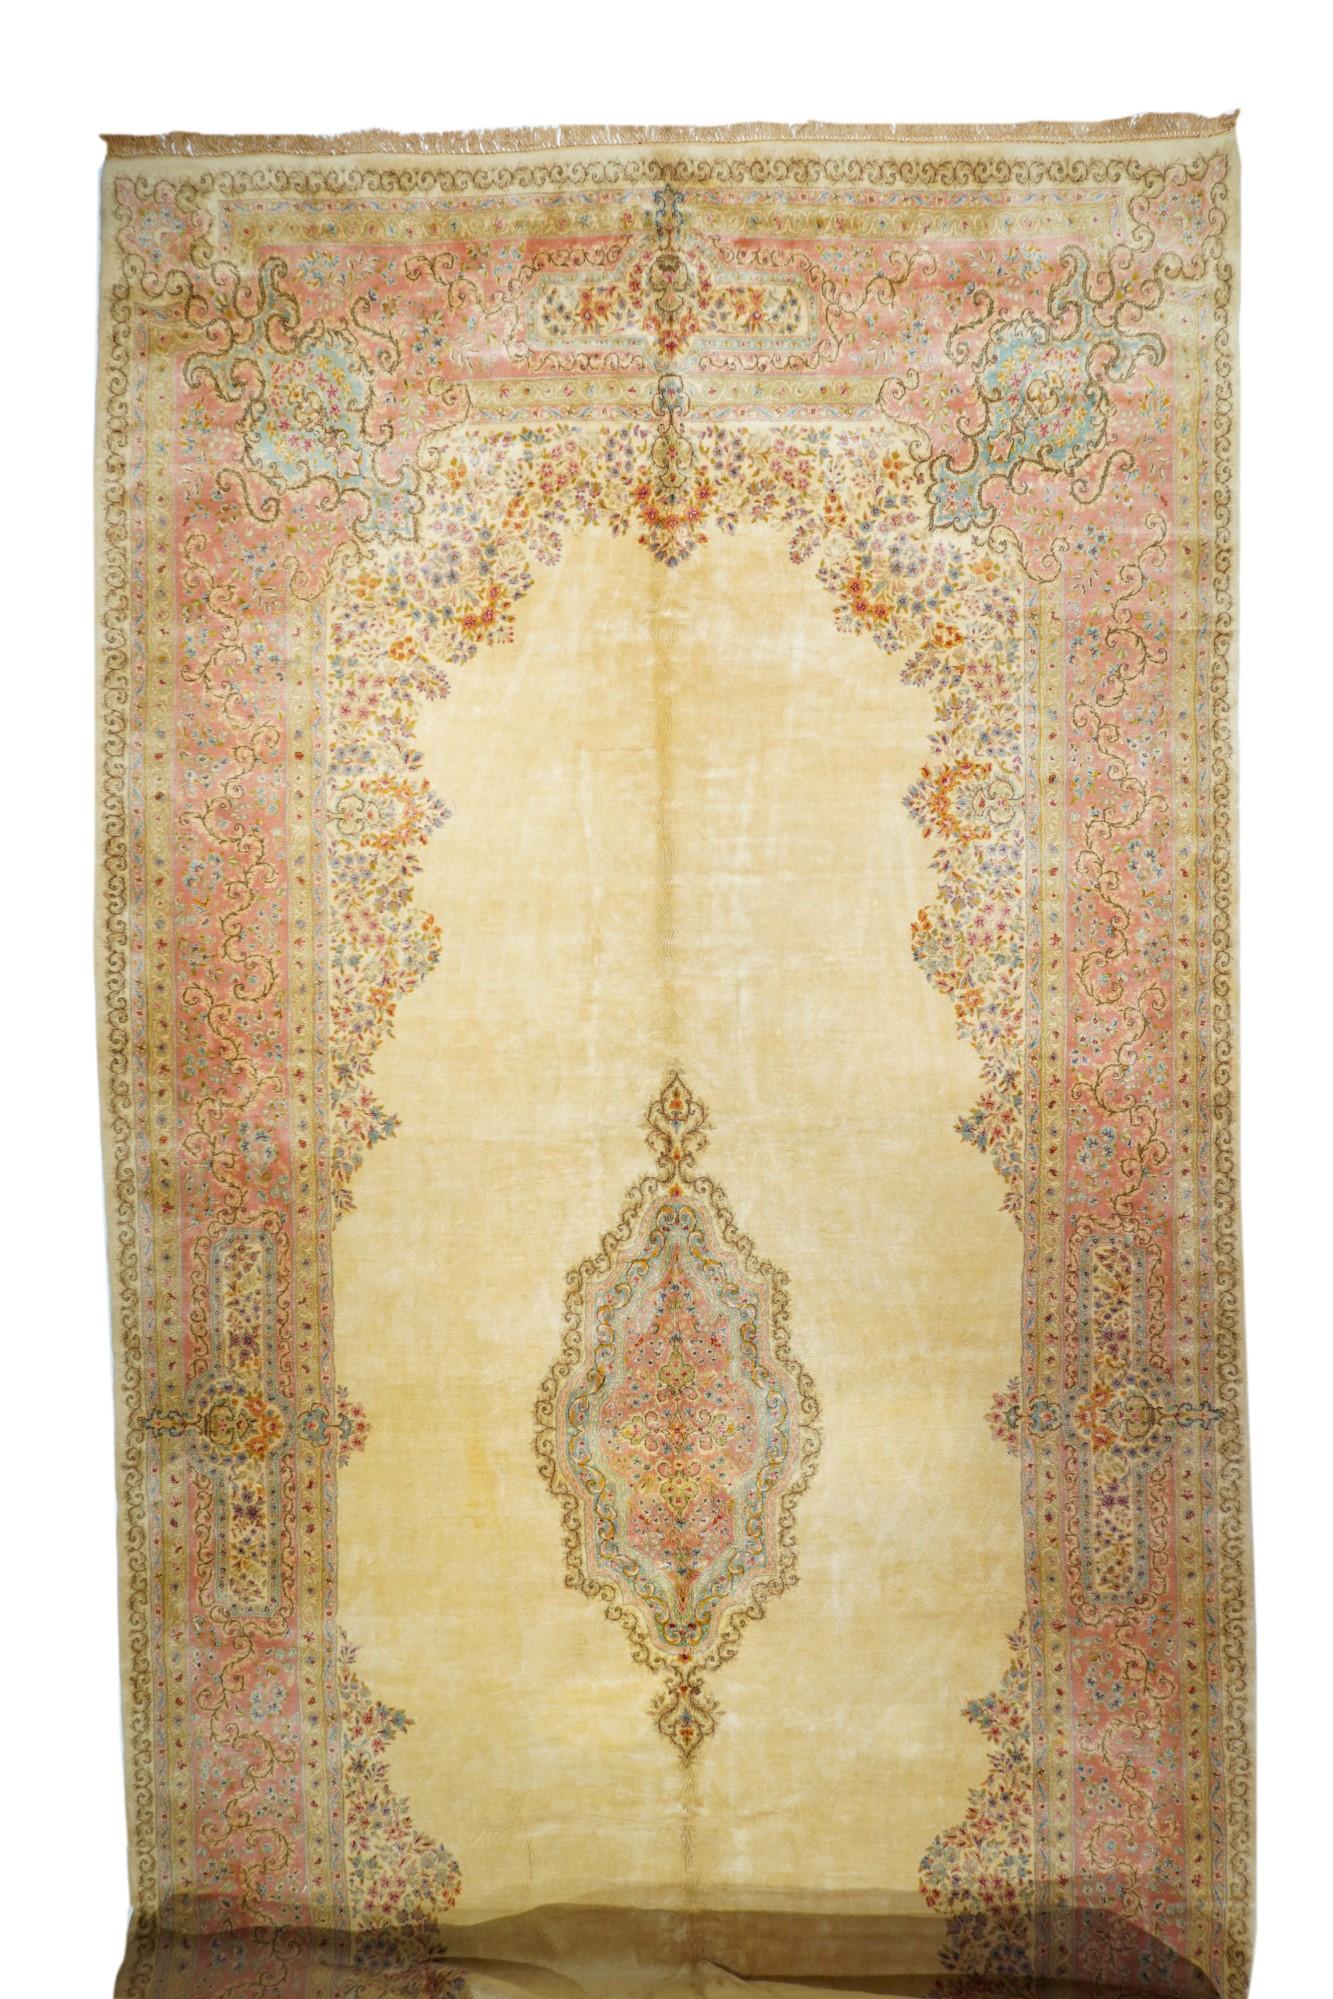 This post-WWII SE Persian bespoke city carpet, clearly woven for the American Market, shows a natural straw-ecru open field hosting a layered light blue/light green cartouche medallion, framed by extended openwork foliage filigree corners. Rust